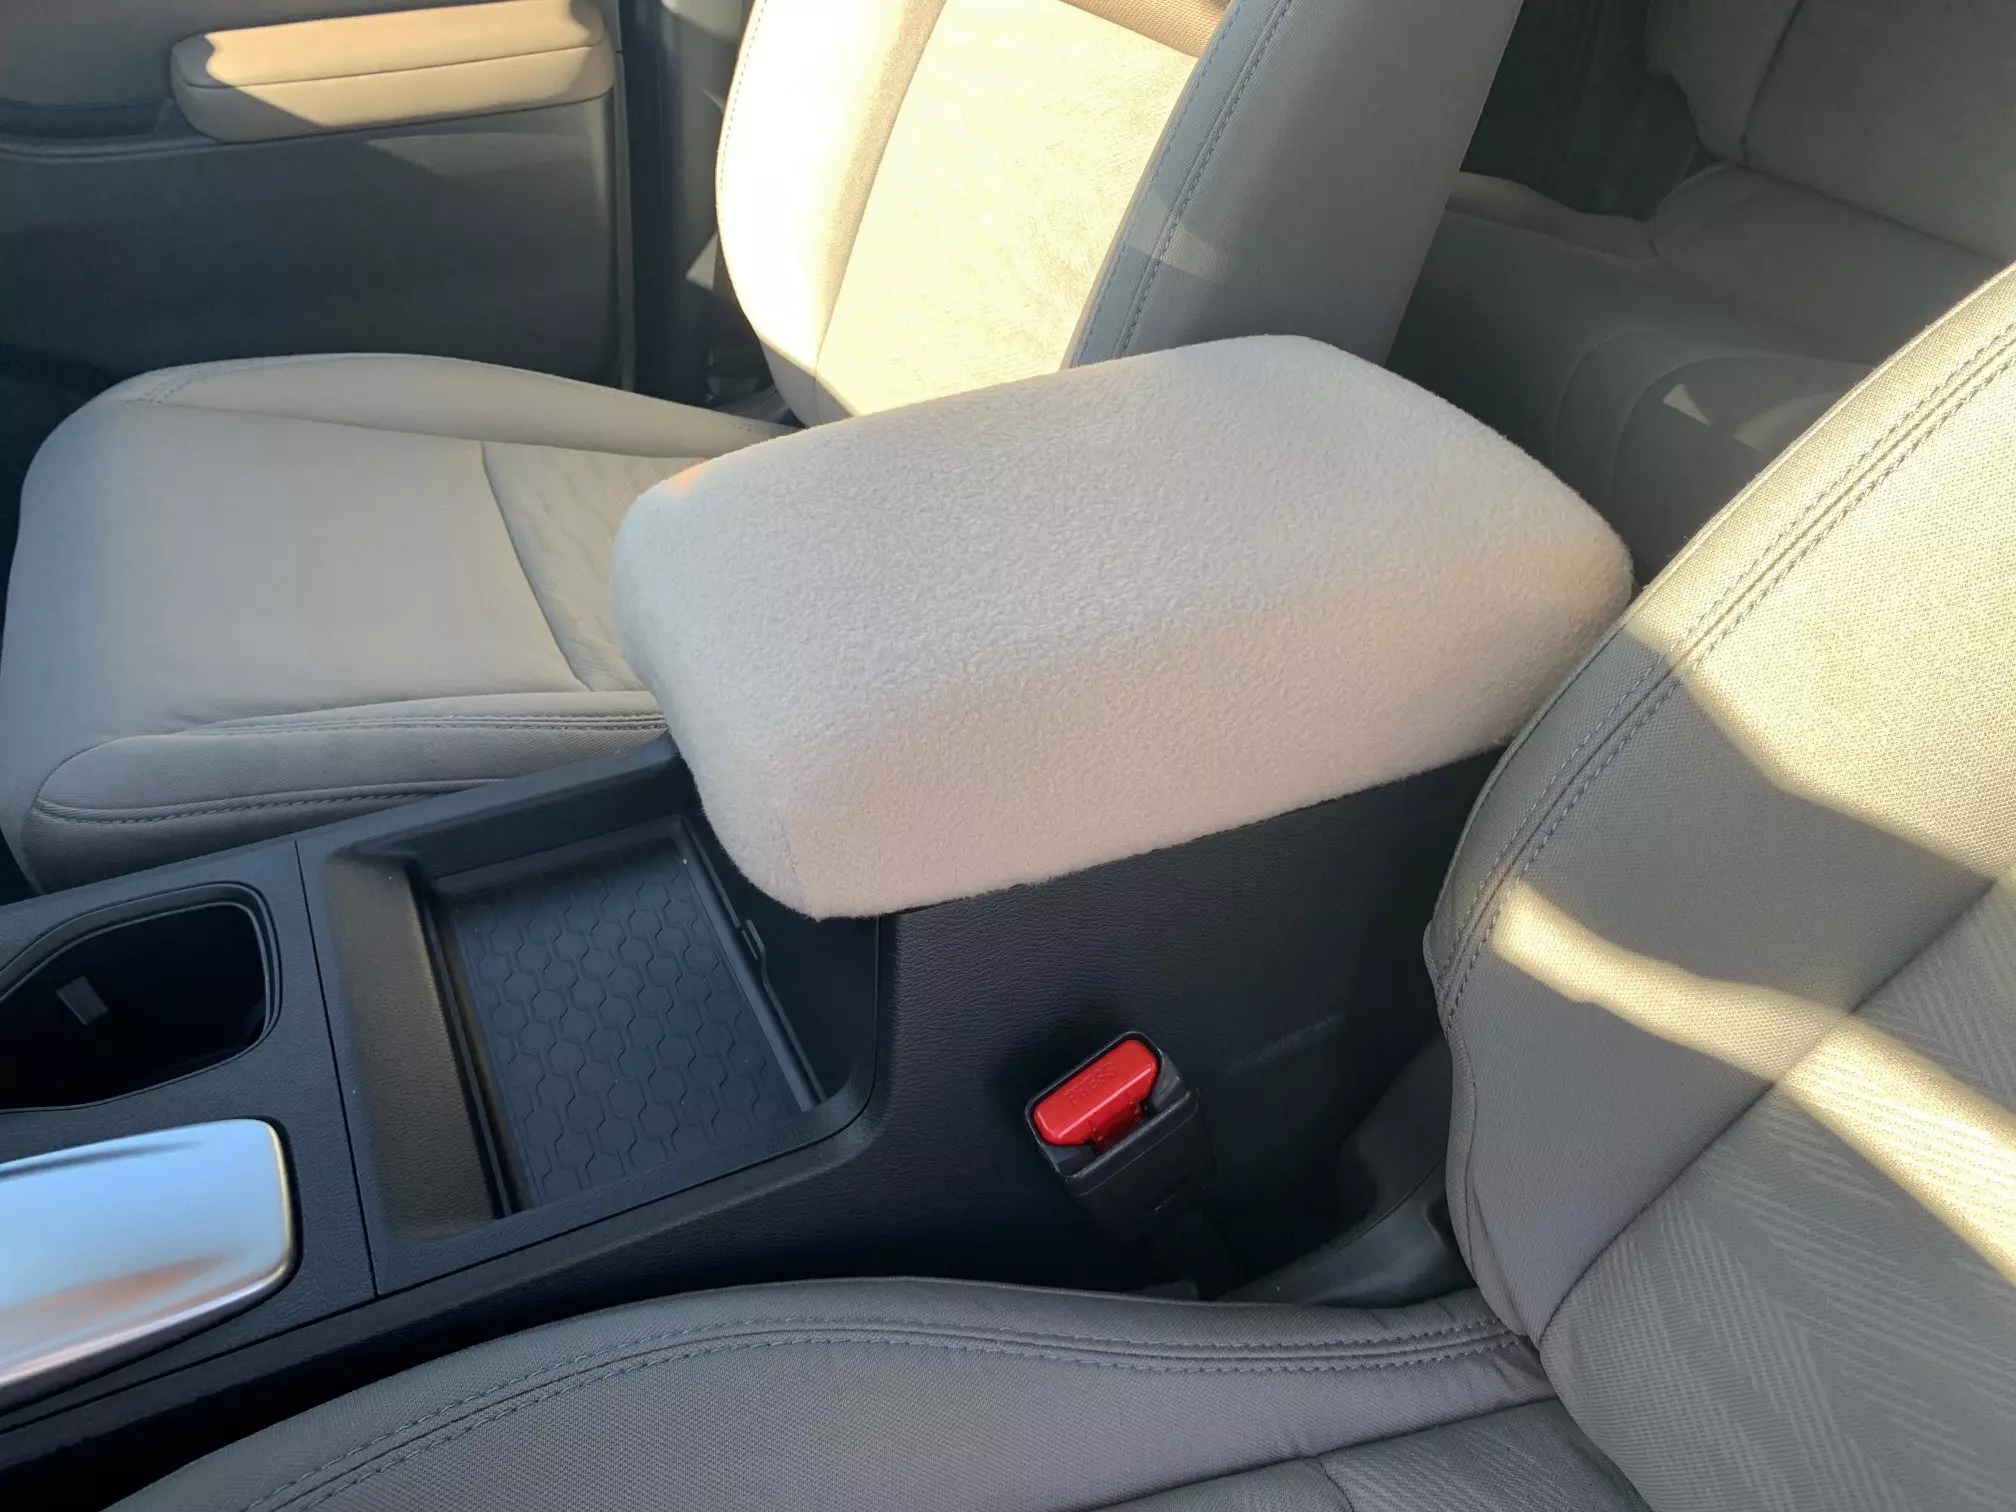 Buy Center Console Armrest Cover fits the Nissan Frontier 2022- Fleece Material